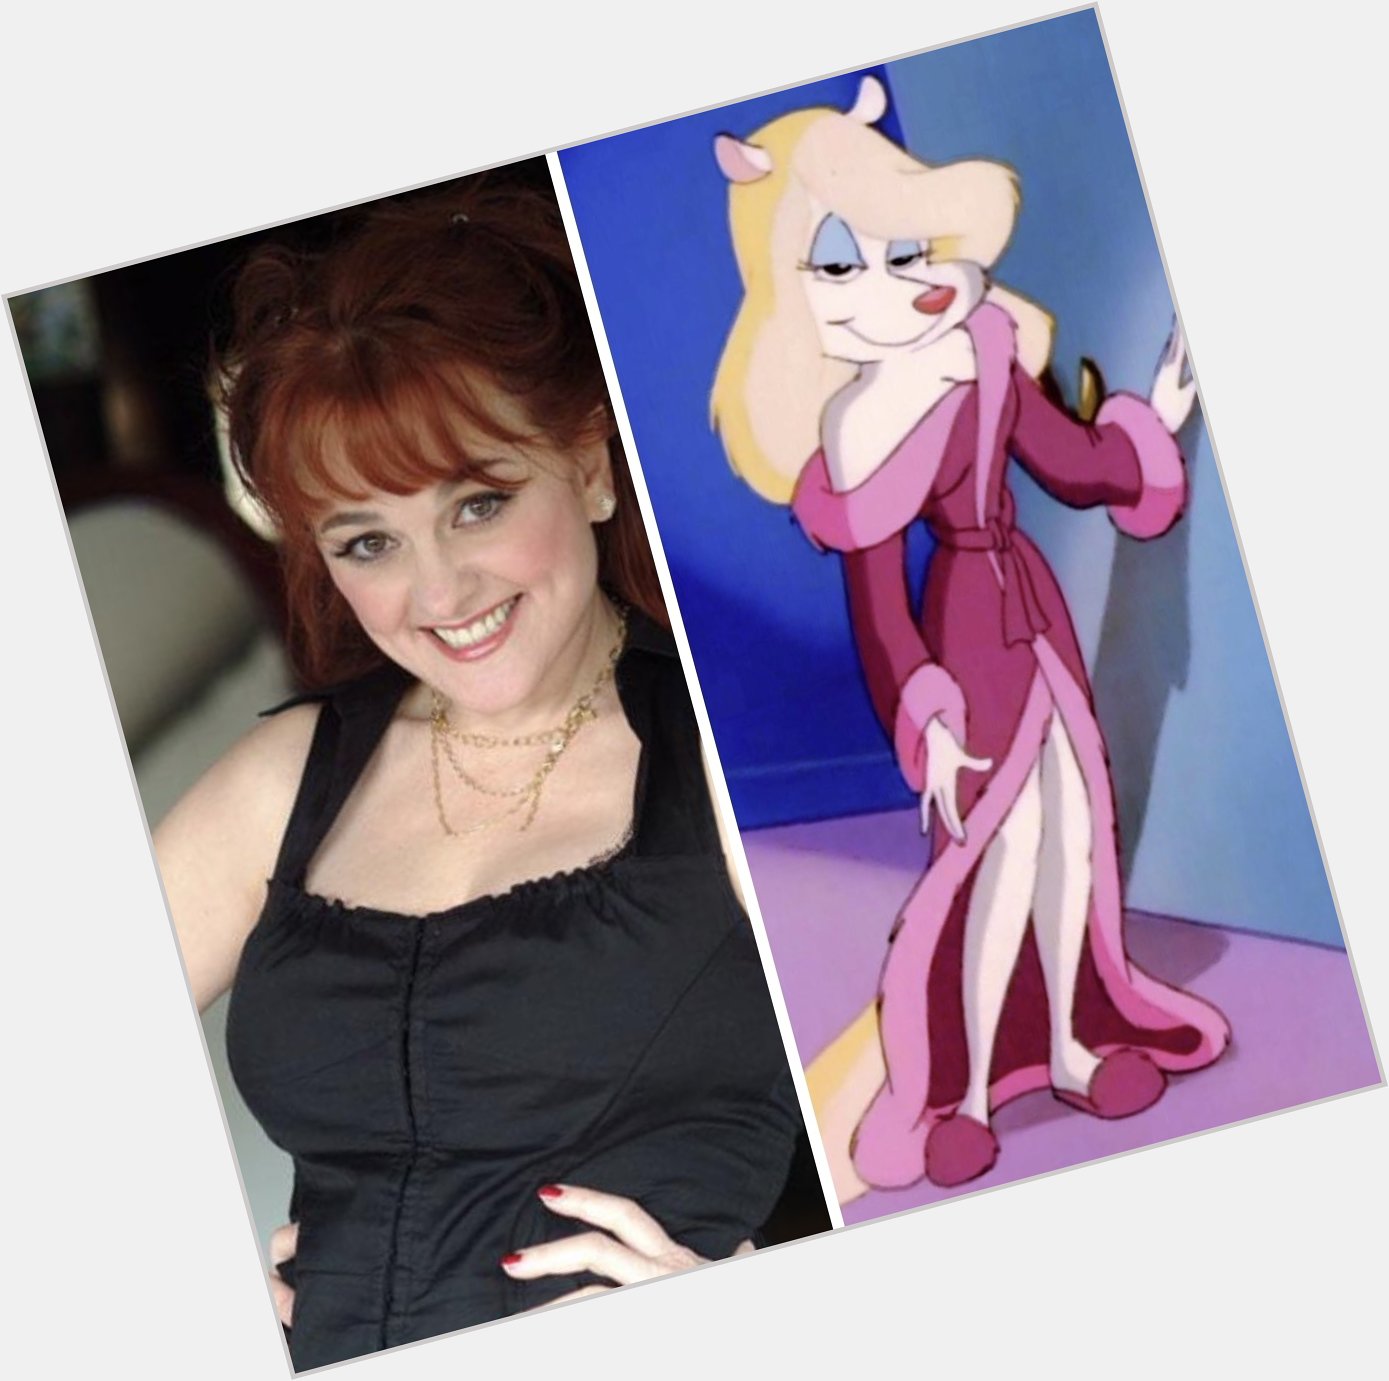 Happy 61st Birthday to Julie Brown! The voice of Minerva Mink in Animaniacs. 